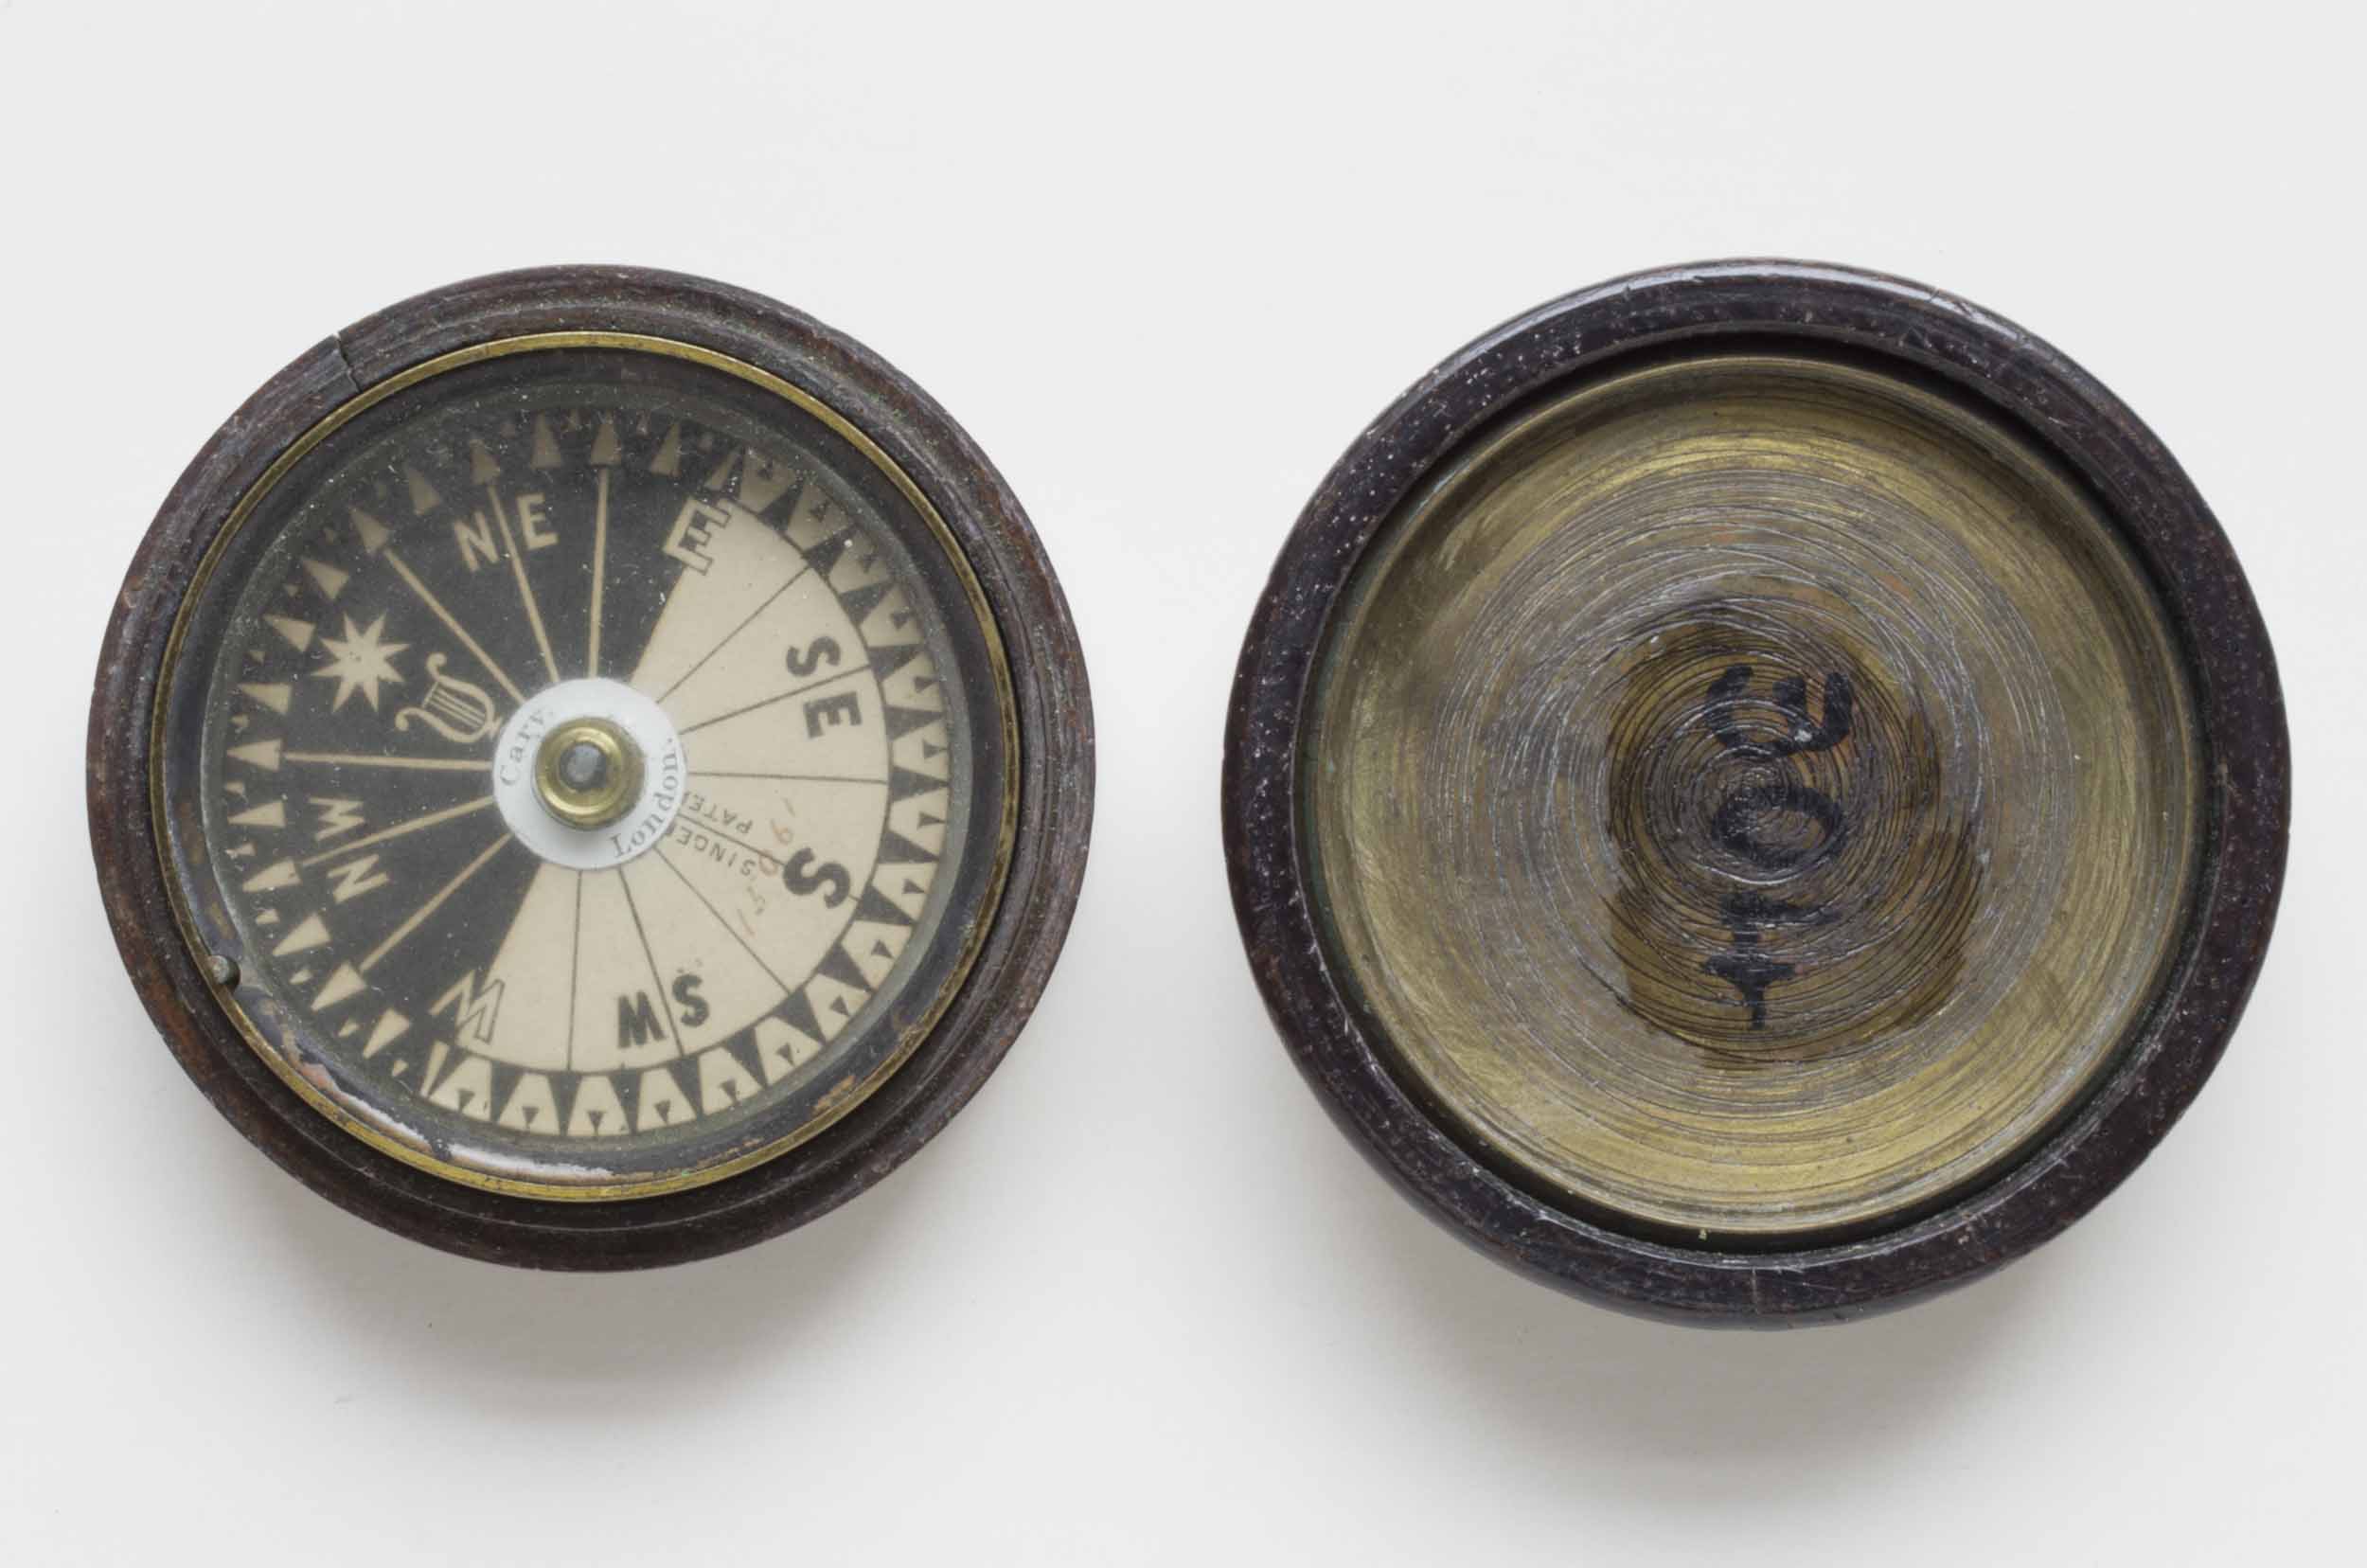 Pocket compass used by David Livingstone throughout his travels. Copyright David Livingstone Centre and Roddy Simpson. Object images used by permission. May not be reproduced without the express written consent of the National Trust for Scotland, on behalf of the Scottish National Memorial to David Livingstone Trust (David Livingstone Centre).